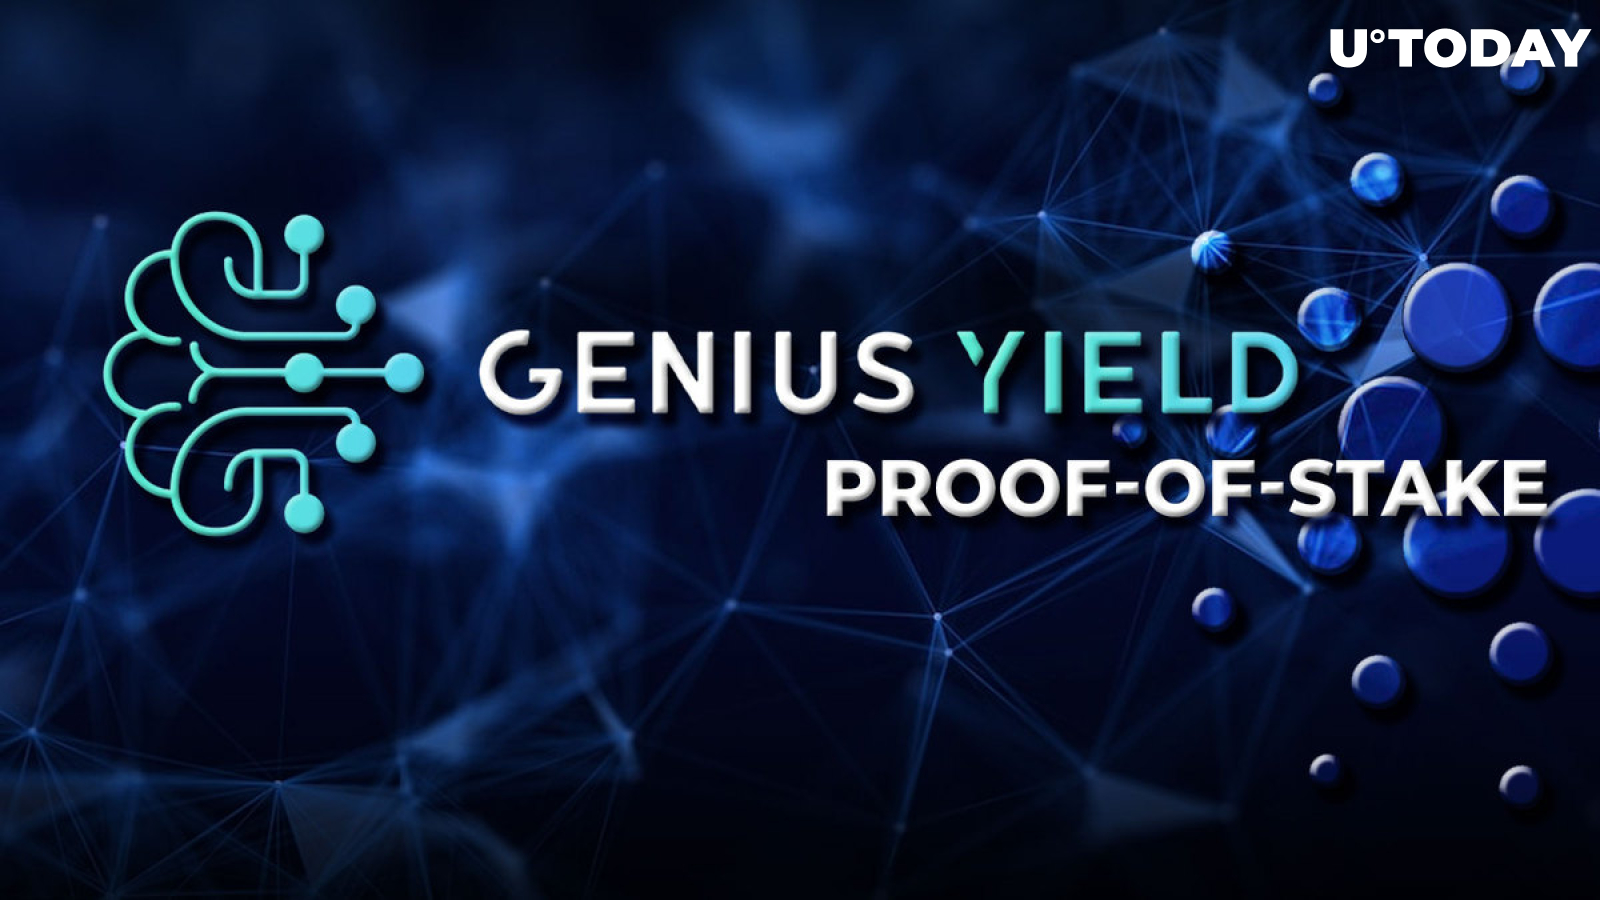 Here's How Genius Yield ISPO Utilizes Cardano's Unique Proof-of-Stake Architecture: Interview with Genius Yield Team